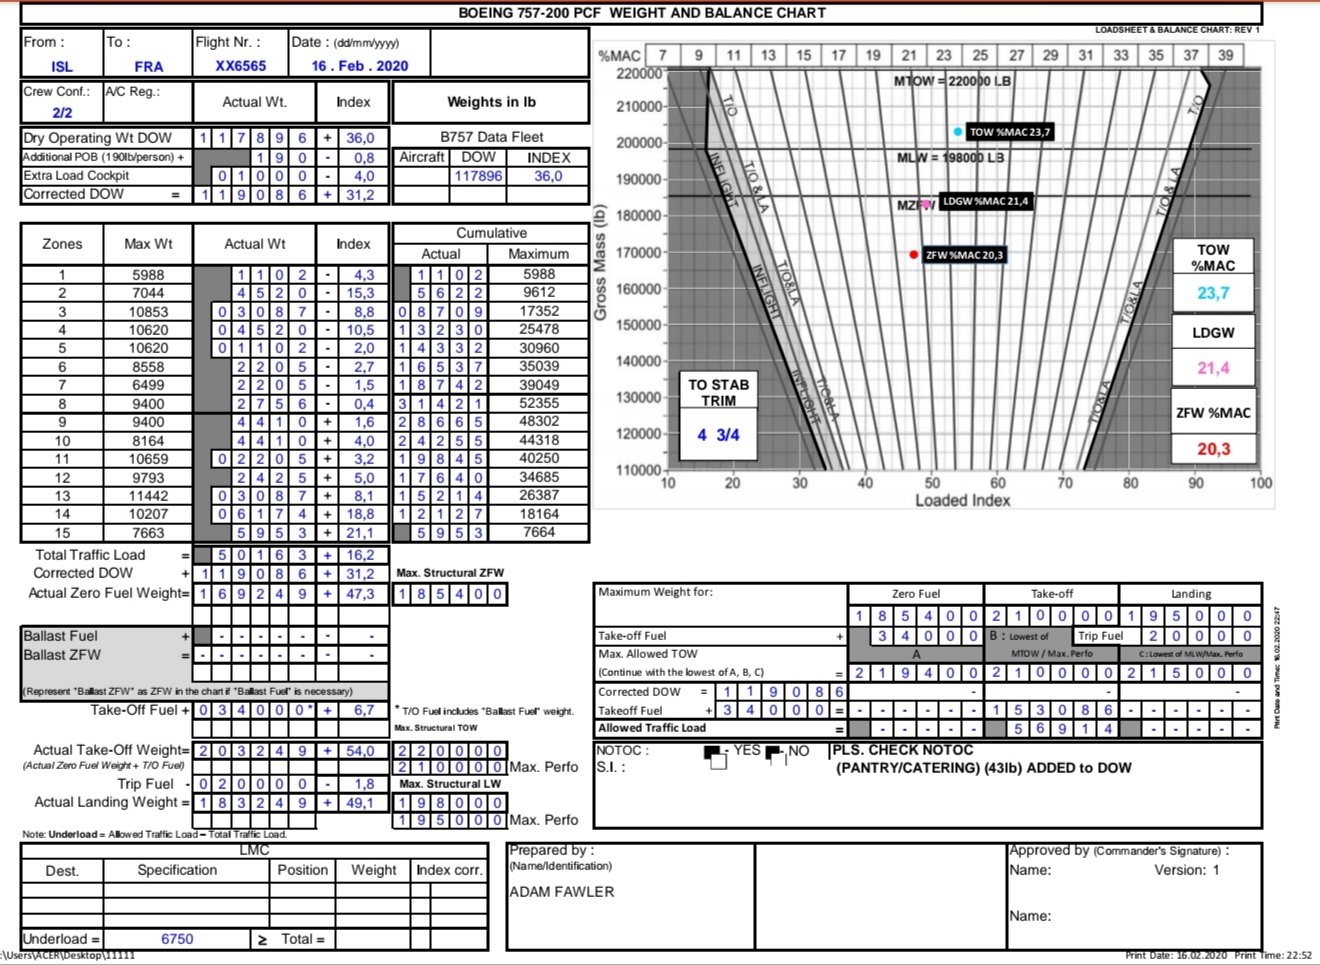 bud Skalk Kvalifikation AeroTrimLine on Twitter: "Electronic load and trim sheet, load plan ready  and available, for more info: aerotrimline@gmail.com #B757pcf #loadsheet  #excel #macro #boeing #airbus #aircargo #cargo #loading #software #aviation  #sky #cargoplane #B757F #B757 #